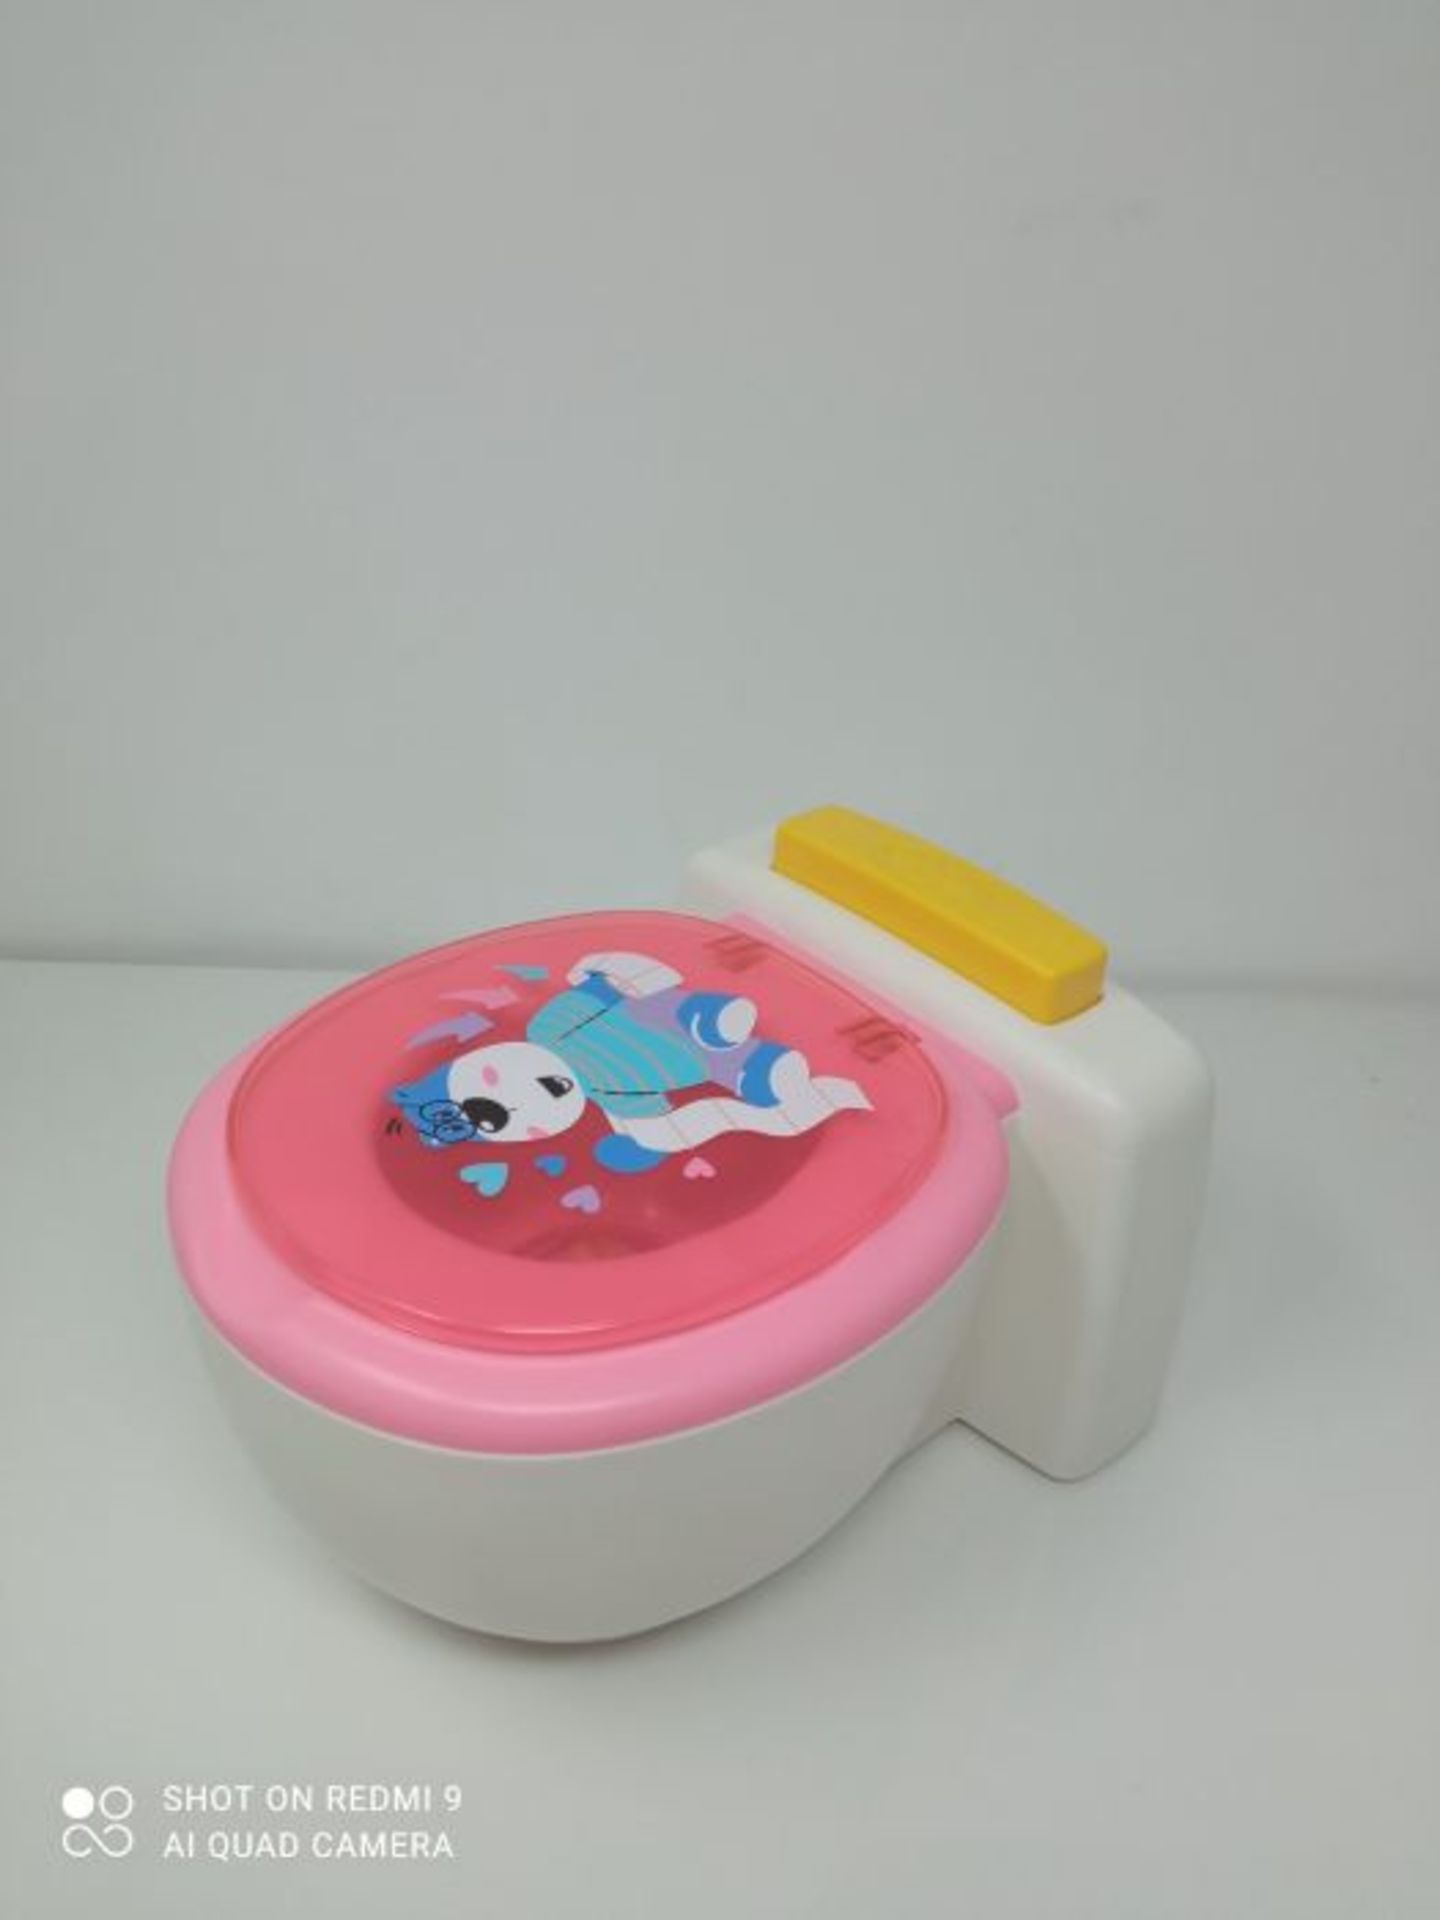 BABY born Bath Poo-Poo Toilet - Real Sound Effects - For Small Hands - Rainbow Glitter - Image 3 of 3